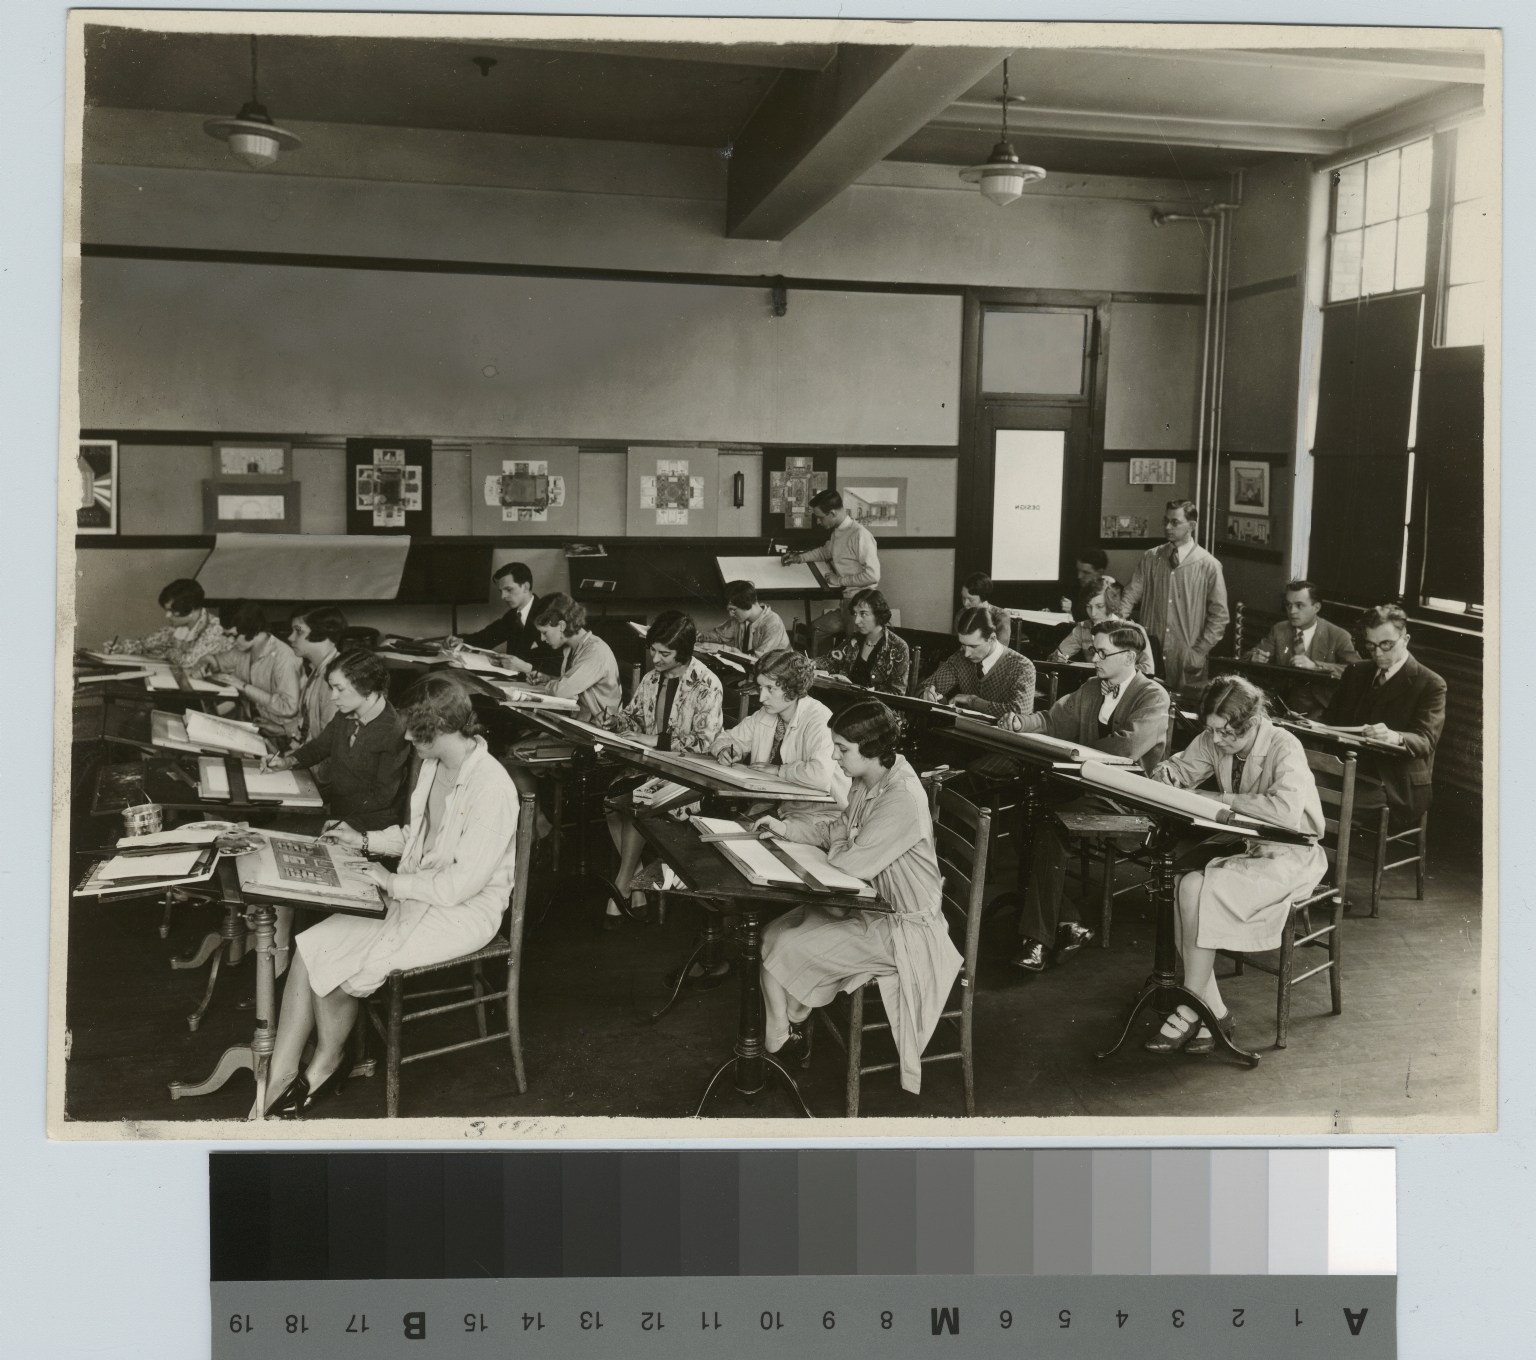 Academics, Rochester Athenaeum and Mechanics Institute design class with instructor Charles Horn, [1920-1930]